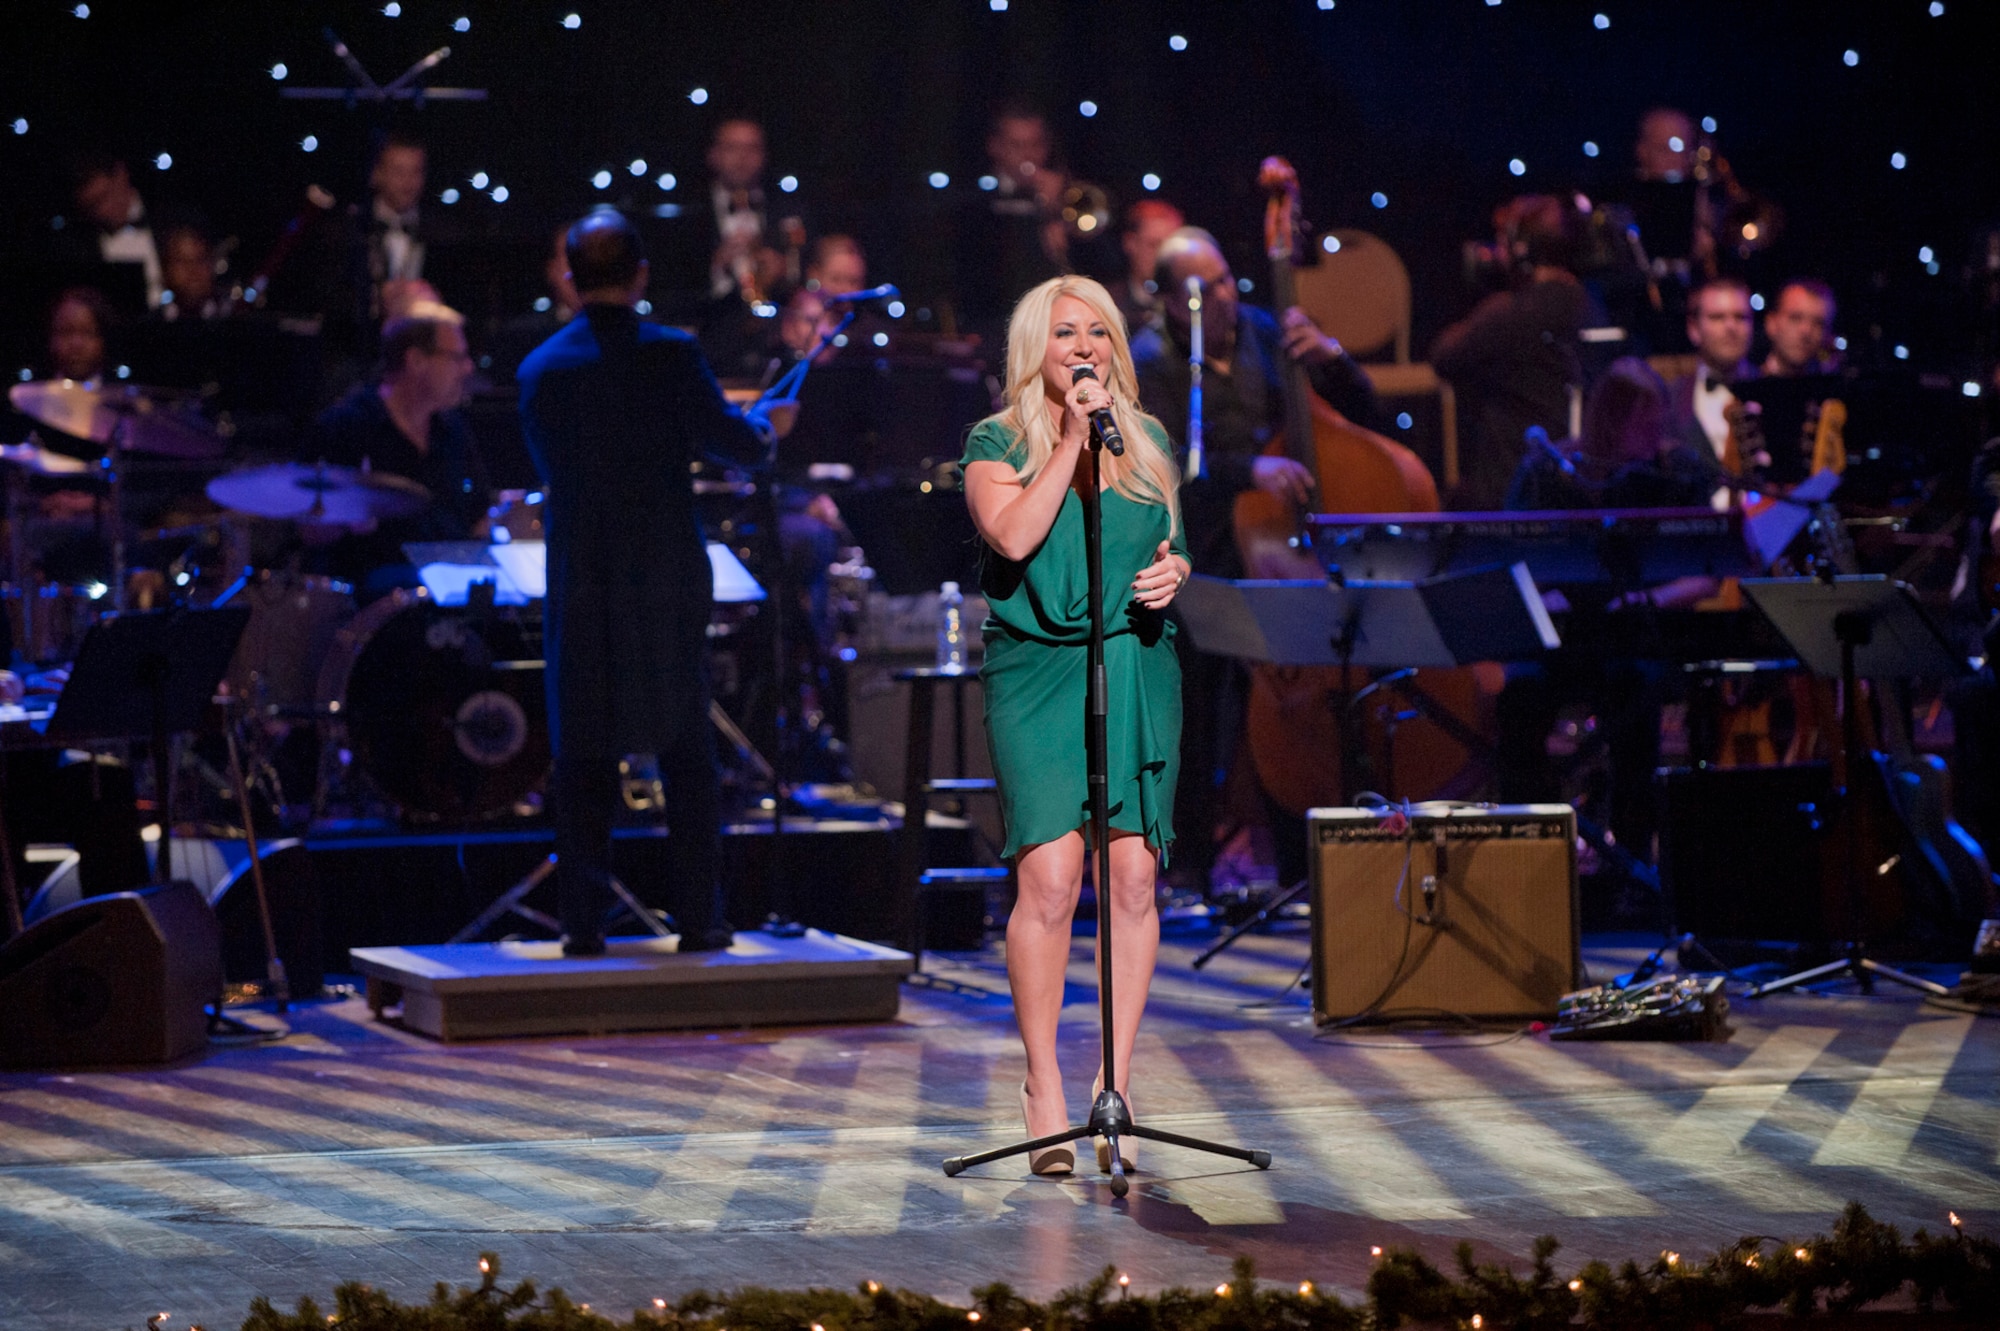 Grammy winning vocalist Lee Ann Womack performs during the taping of "Holiday Notes from Home" at the Grand Ole Opry House, Nashville, Tenn. Womack joined Little Big Town, the Band of the U.S. Air Force Reserve and the Air Force Strings to record the hour-long special that will air on the American Forces Network and the Great American Country Network this holiday season. (U.S. Air Force photo/Ken Hackman)